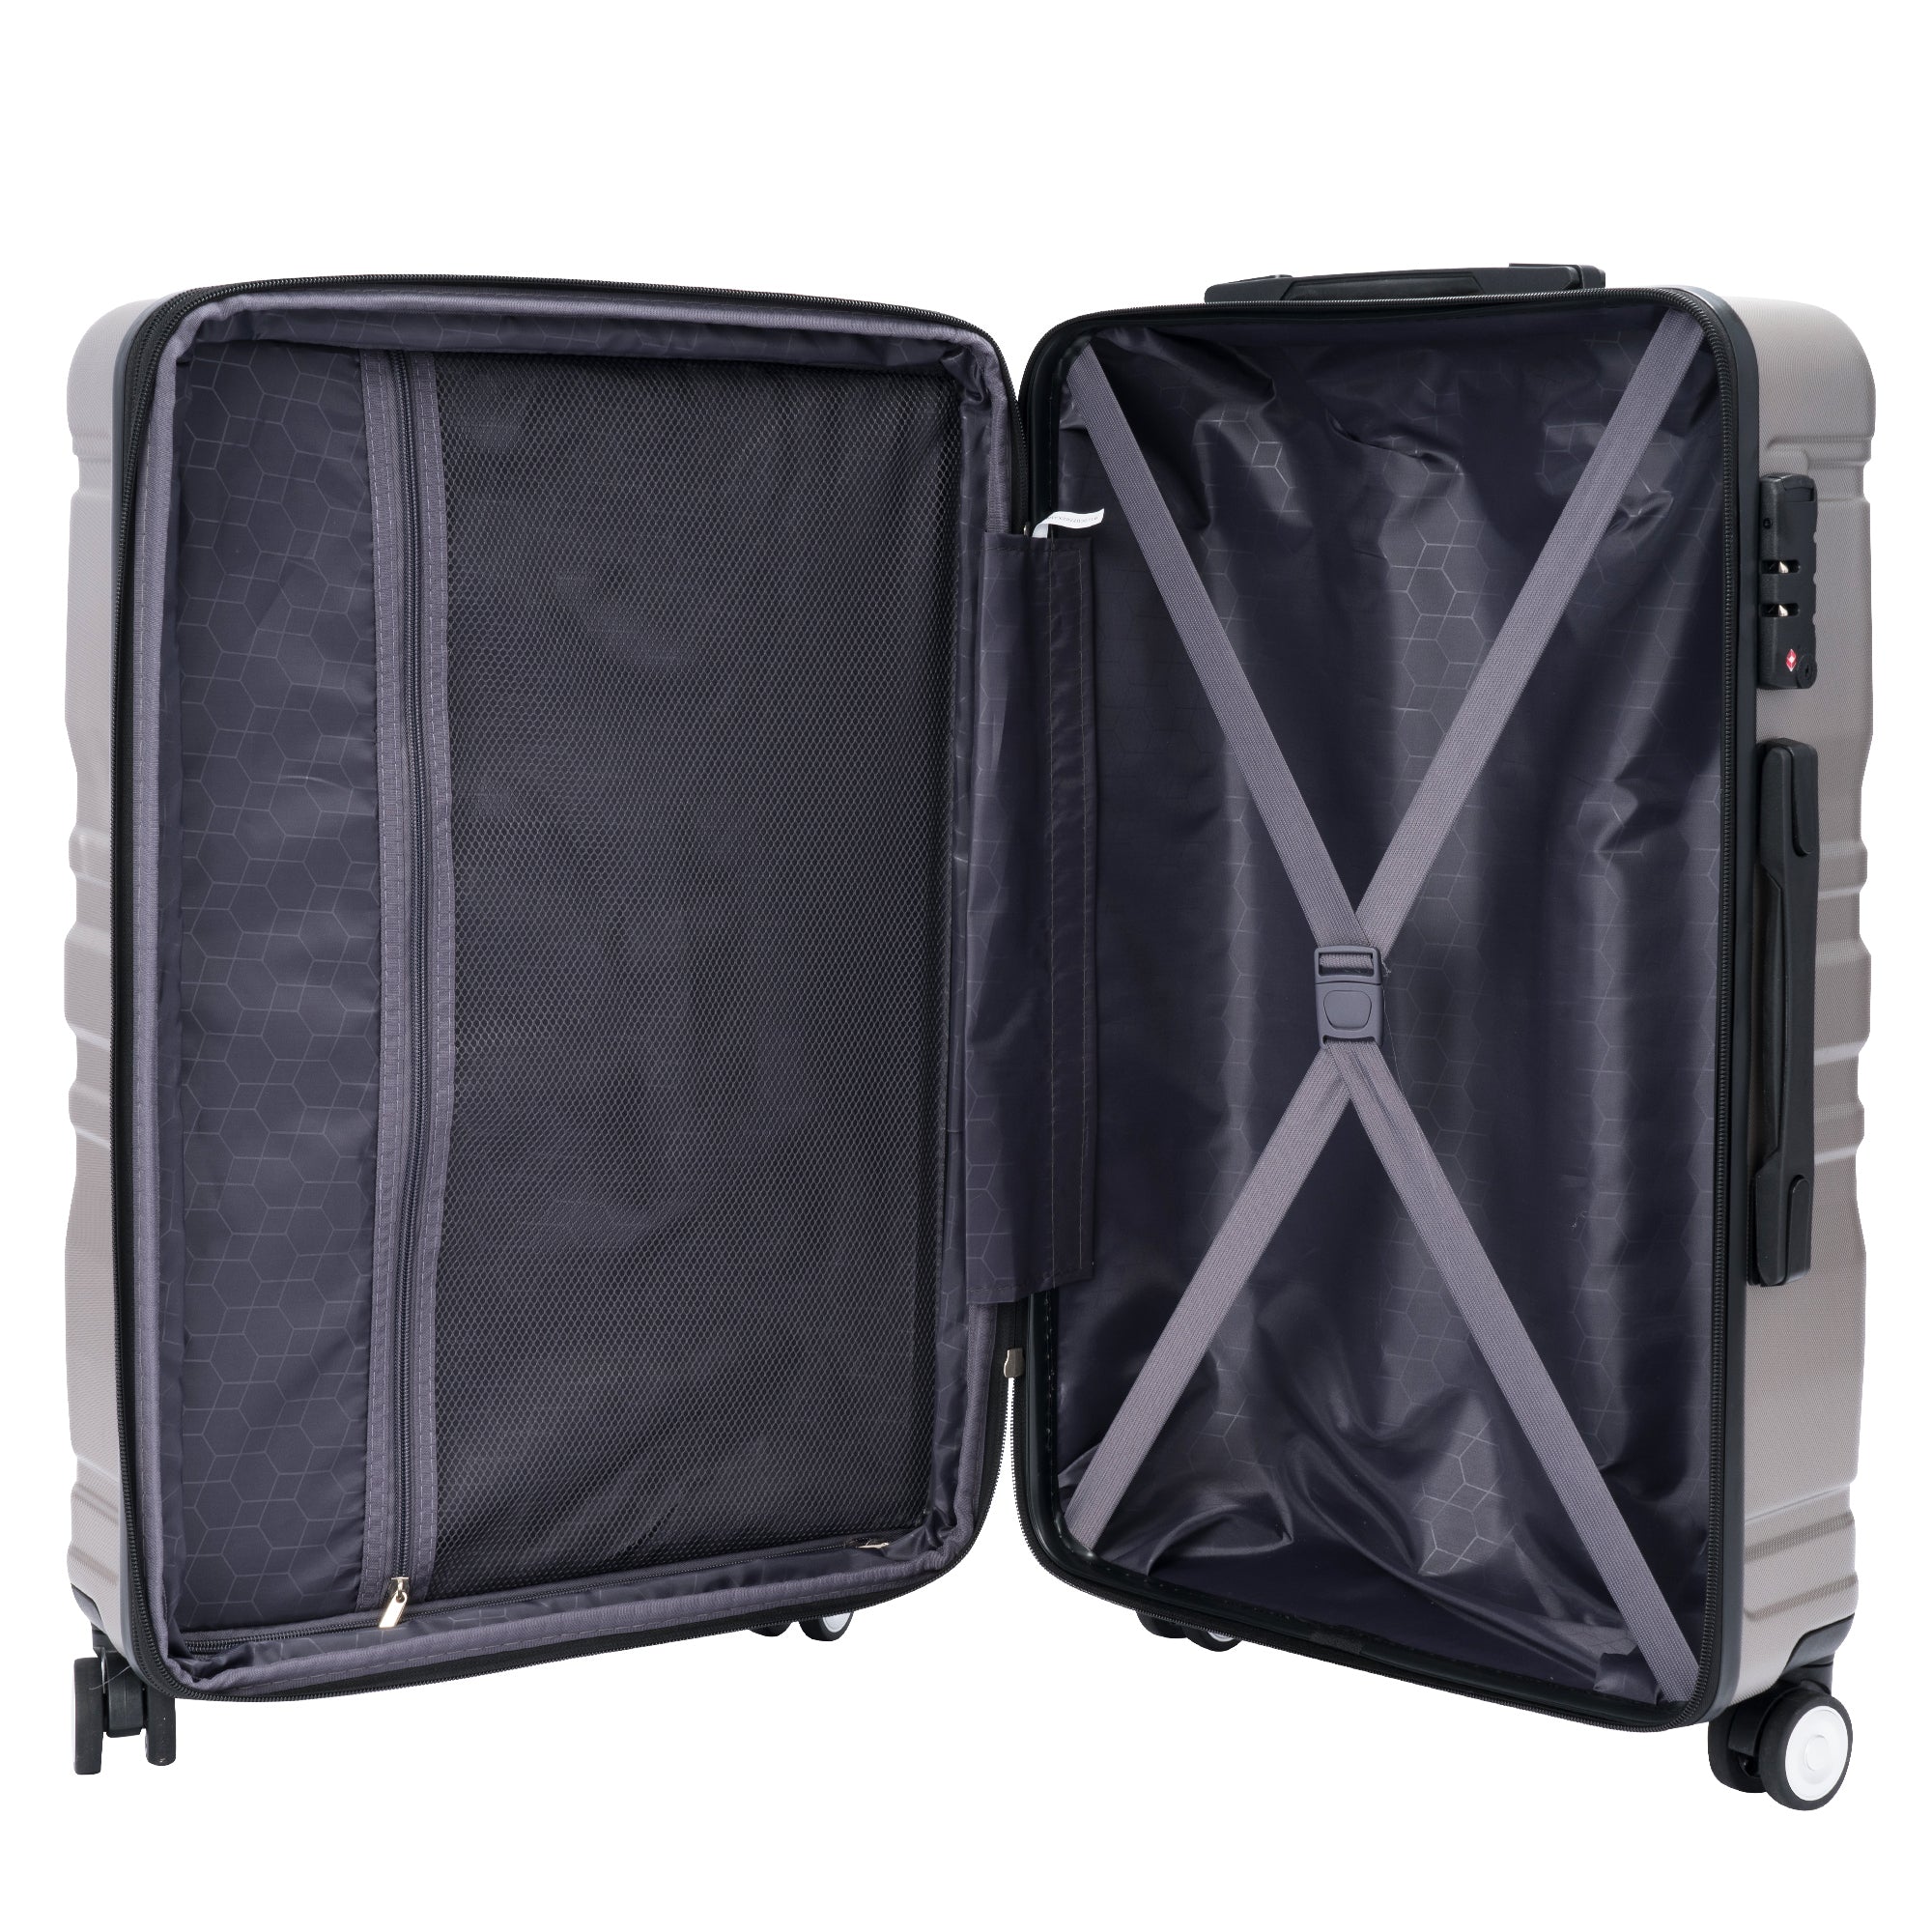 Luggage Sets Model Expandable ABS Hardshell 3pcs dark gray-abs